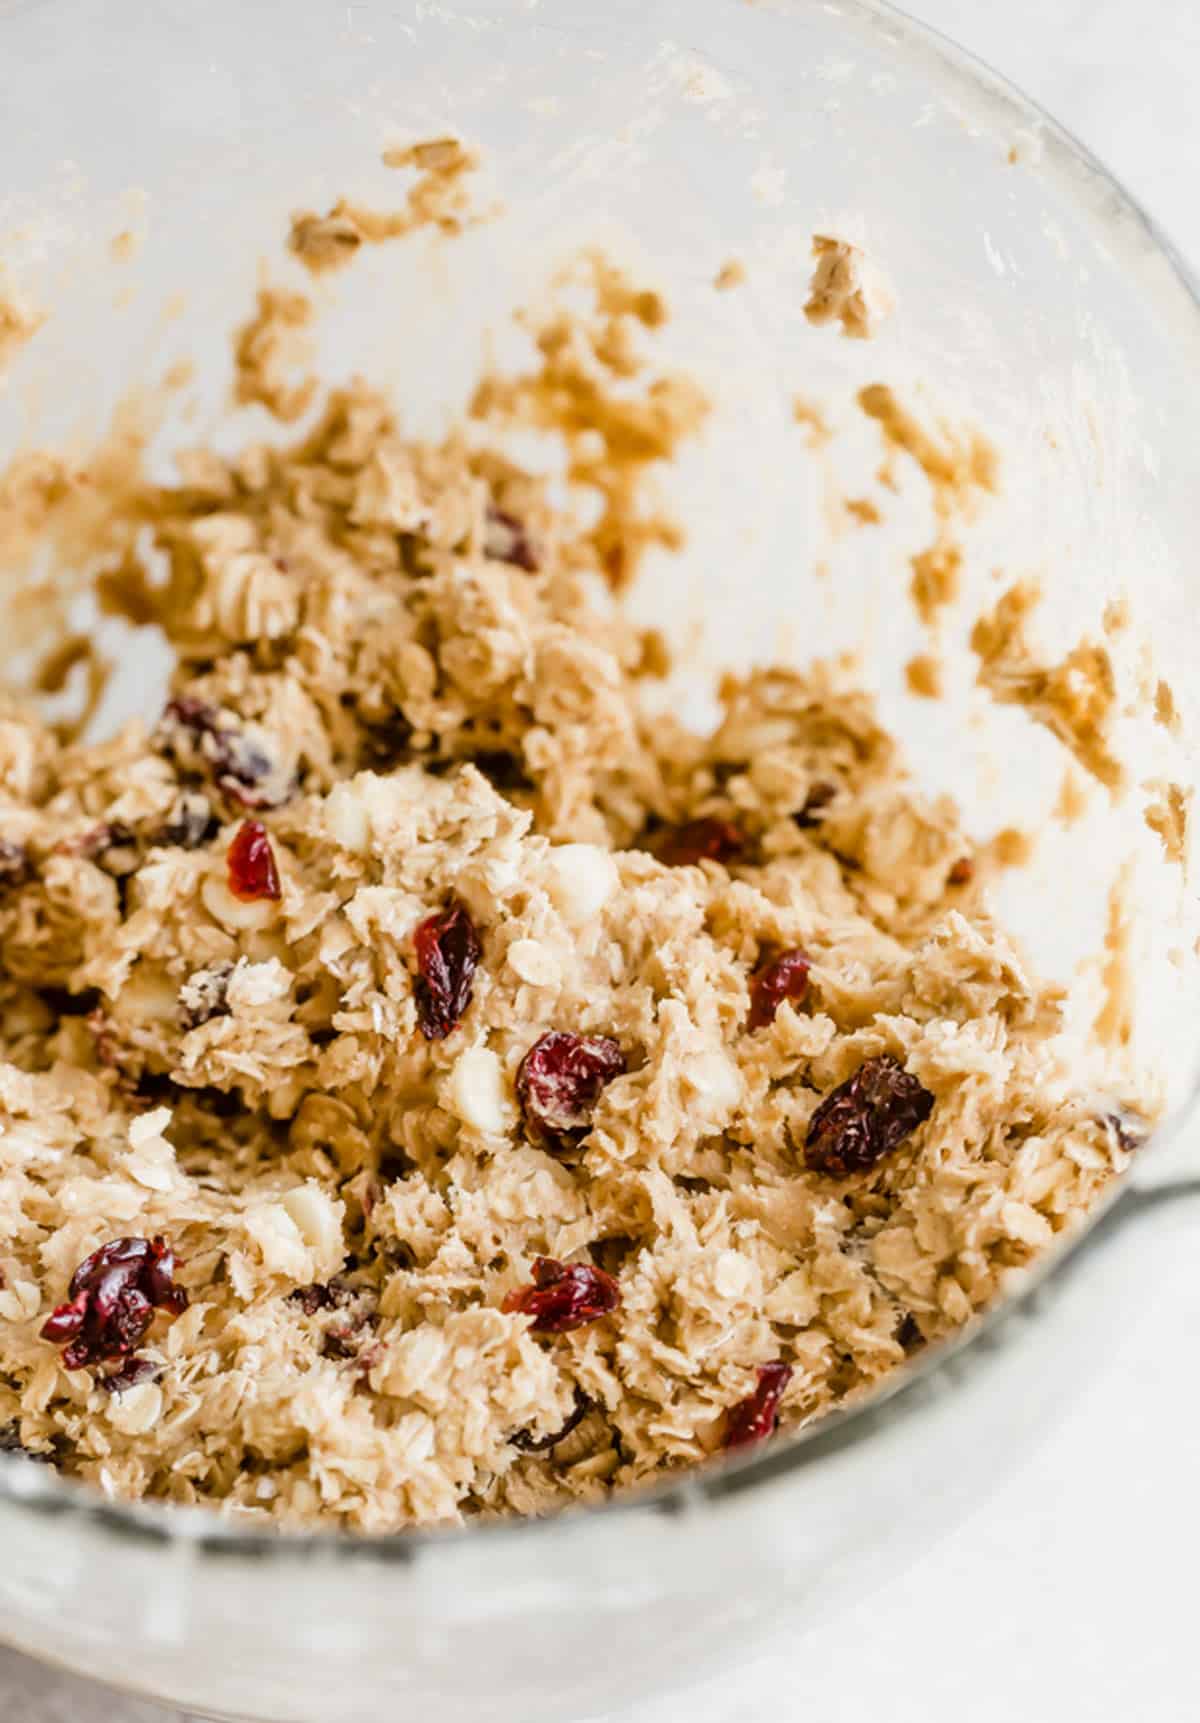 White Chocolate Cranberry Oatmeal Cookie dough batter in a glass bowl.